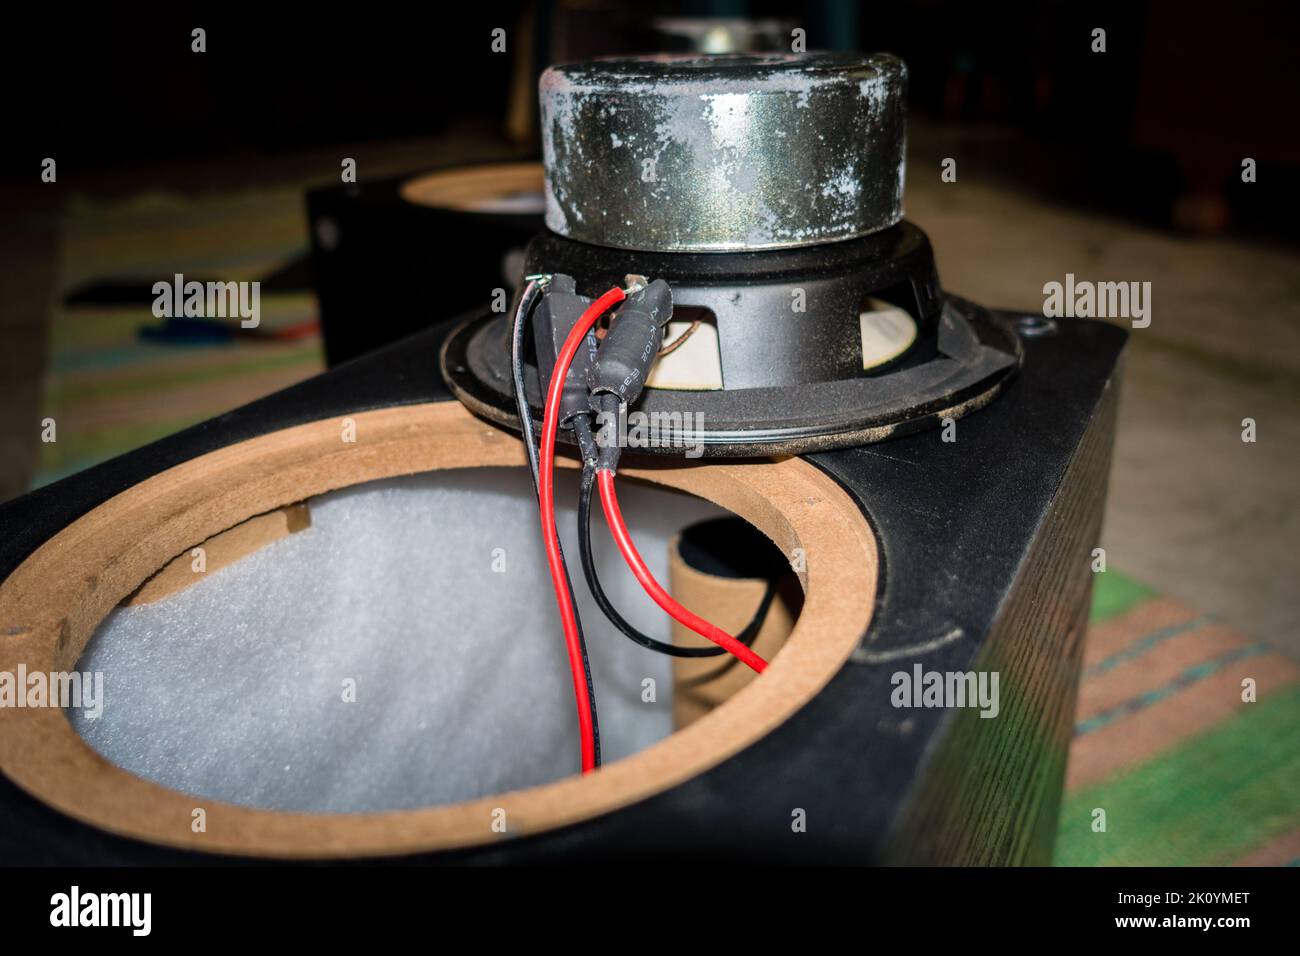 April 13th 2022, Dehradun City Uttarakhand India. A dismantled speaker with exposed wiring and sub woofer unit driver with a large magnet. Stock Photo